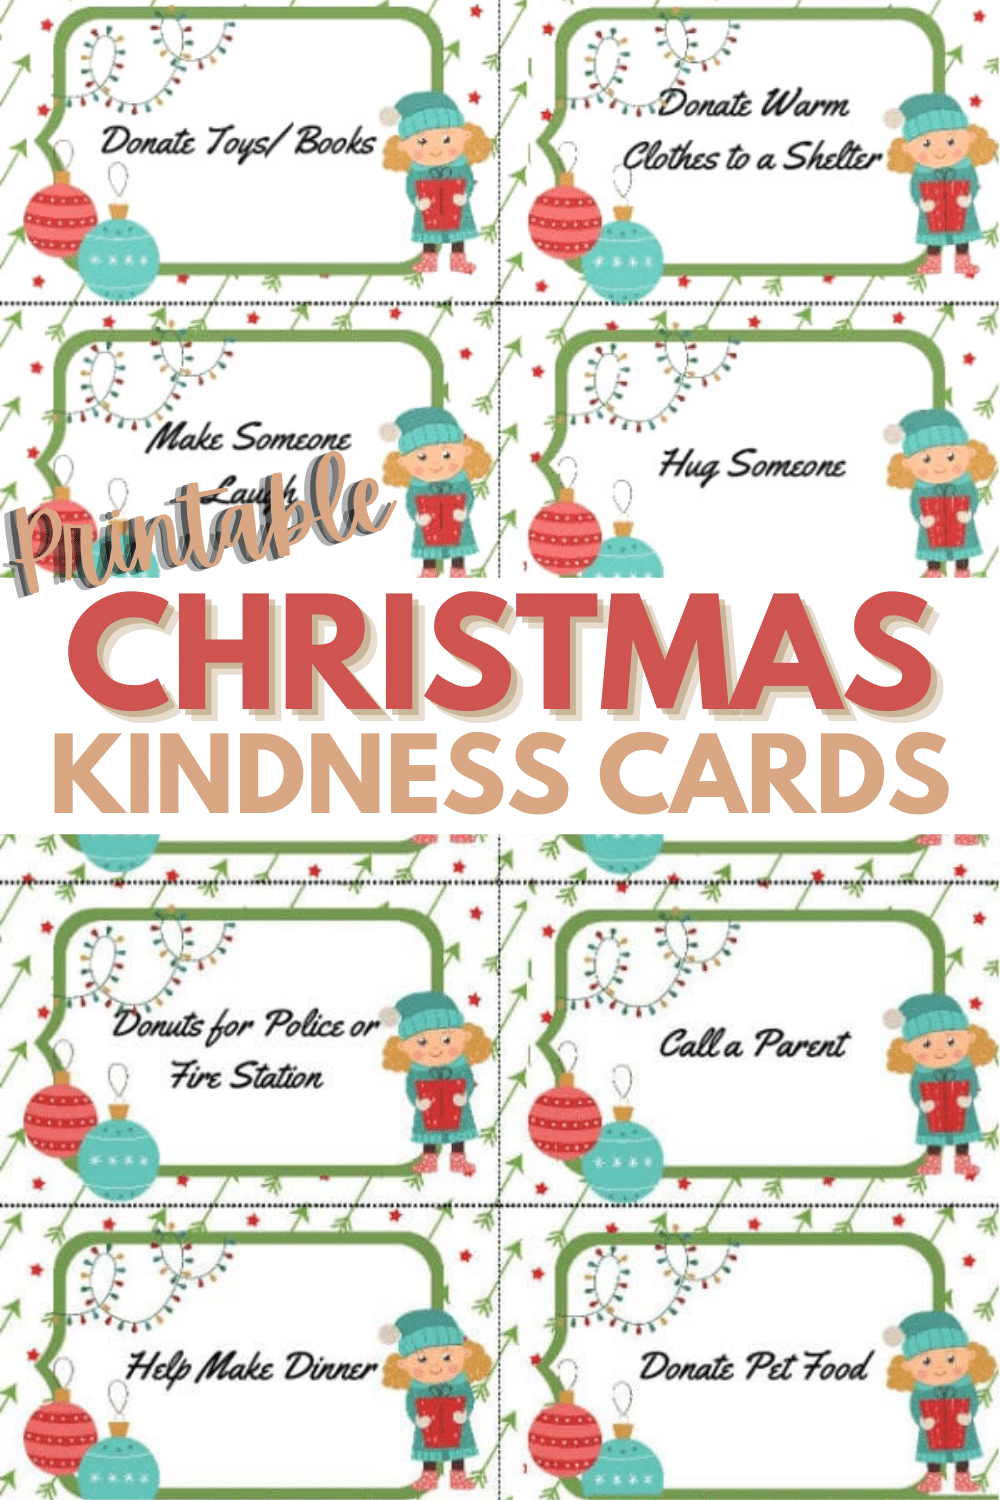 Printable Christmas kindness cards are a thoughtful and festive way to spread goodwill during the holiday season. Whether you want to encourage acts of kindness in others or simply show appreciation for someone special, these printable cards